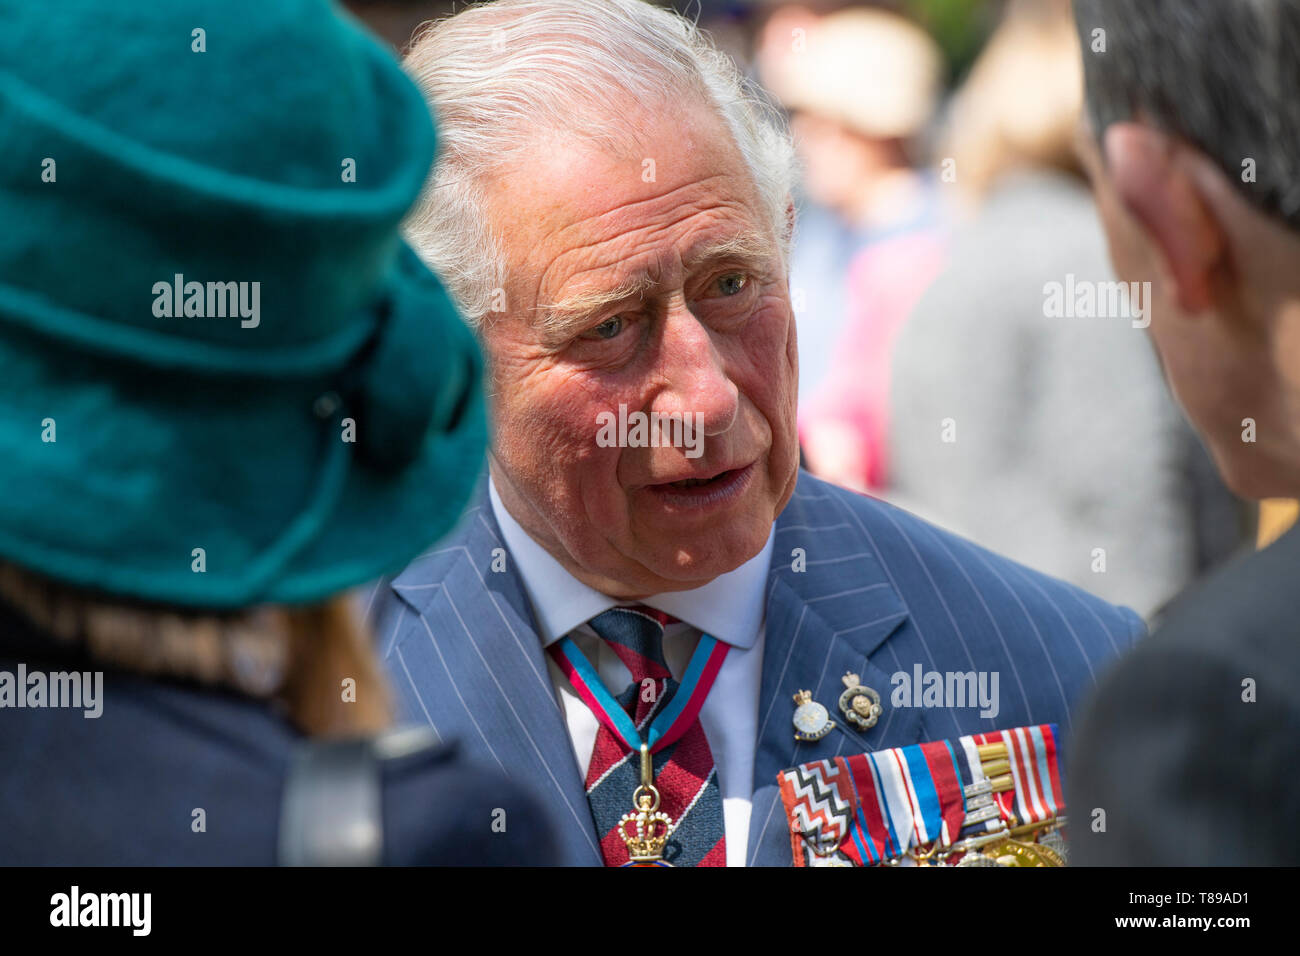 Hyde Park London, UK. 12th May 2019. HRH The Prince of Wales, Field Marshal, Colonel in Chief 1st The Queen’s Dragoon Guards, takes the salute at the Combined Cavalry Old Comrades Association 95th annual parade and service. The parade is commanded by Lieutenant-General Sir Simon Mayall, KCB, CB, Colonel of 1st The Queens Dragoon Guards who are the sponsor regiment of this year’s event. Credit: Malcolm Park/Alamy Live News. Stock Photo